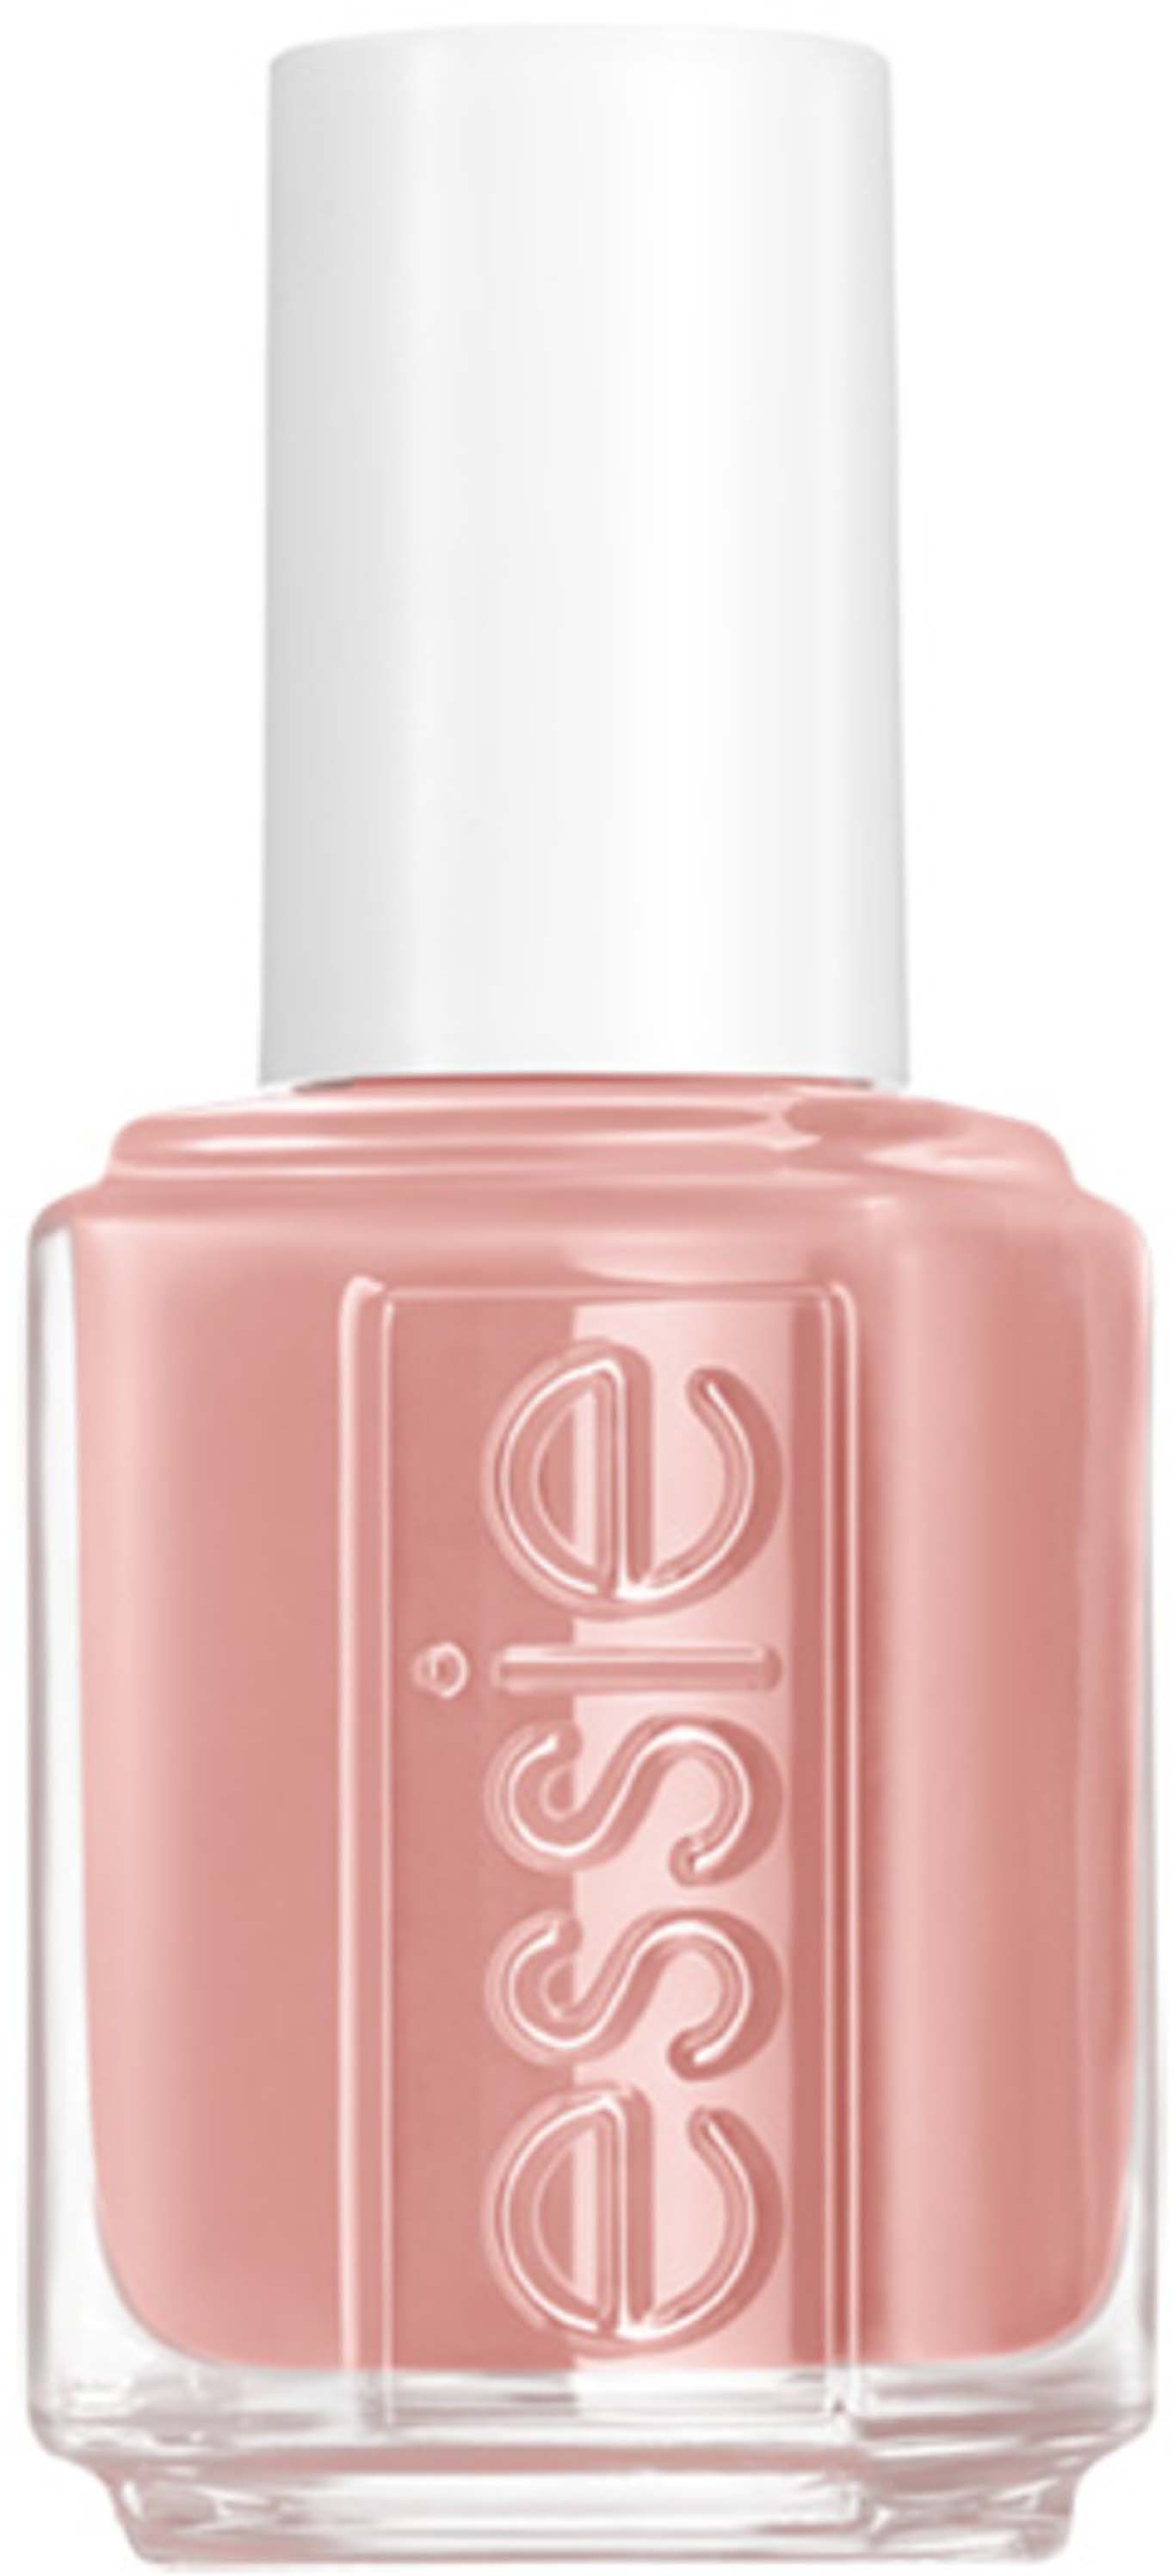 Essie not red-y for bed collection Nail Lacquer 749 The Snuggle Is Real | Nagellacke